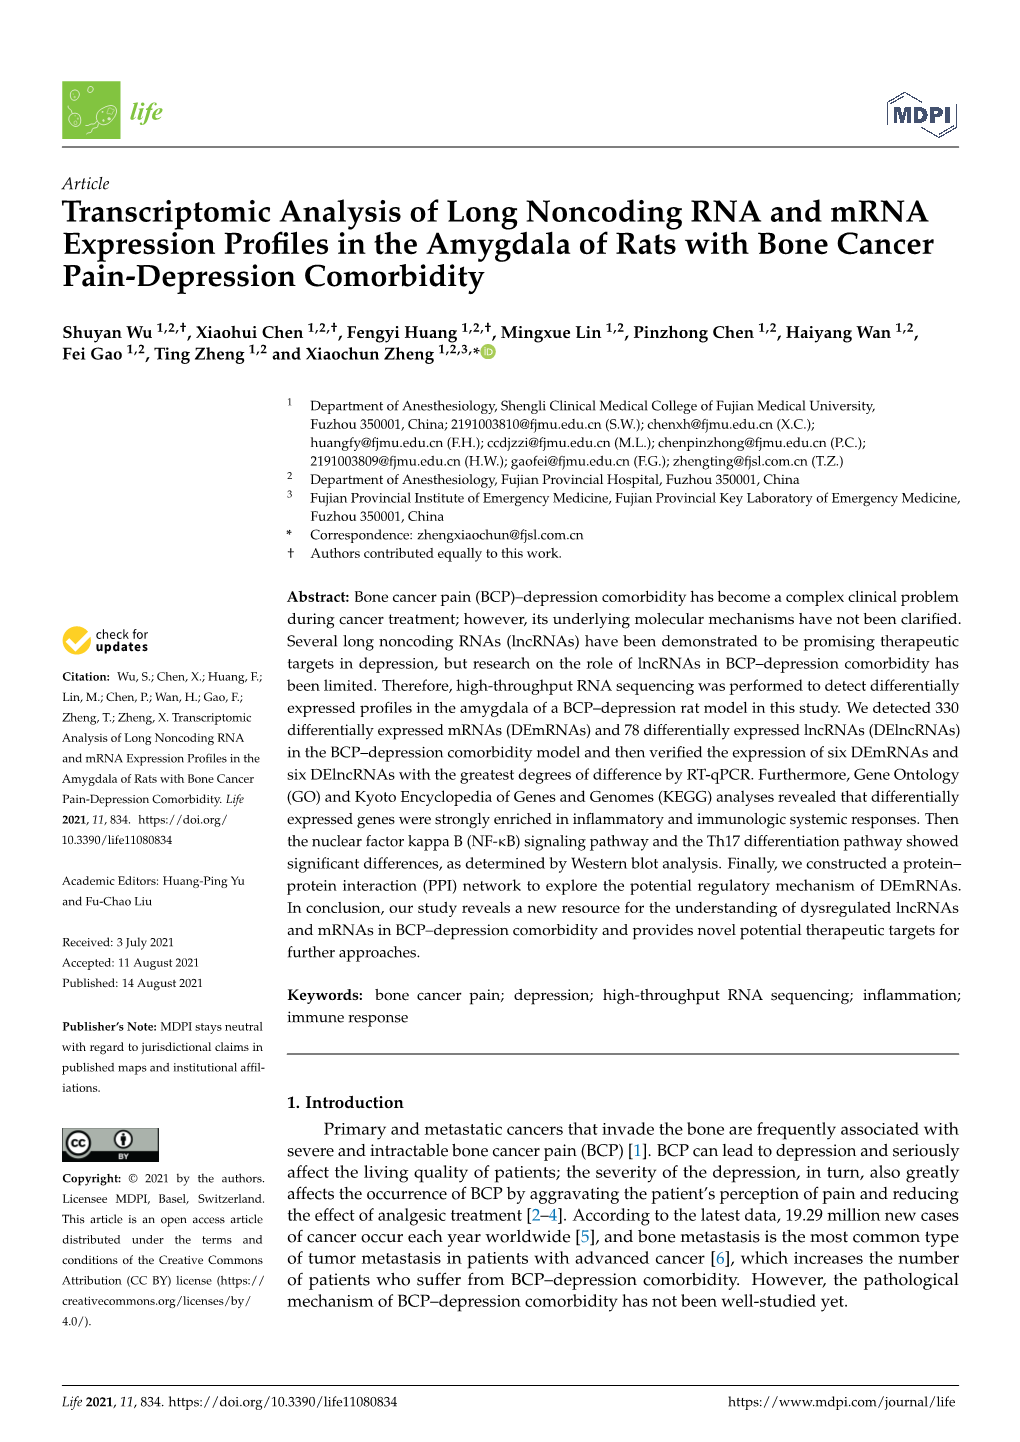 Transcriptomic Analysis of Long Noncoding RNA and Mrna Expression Proﬁles in the Amygdala of Rats with Bone Cancer Pain-Depression Comorbidity